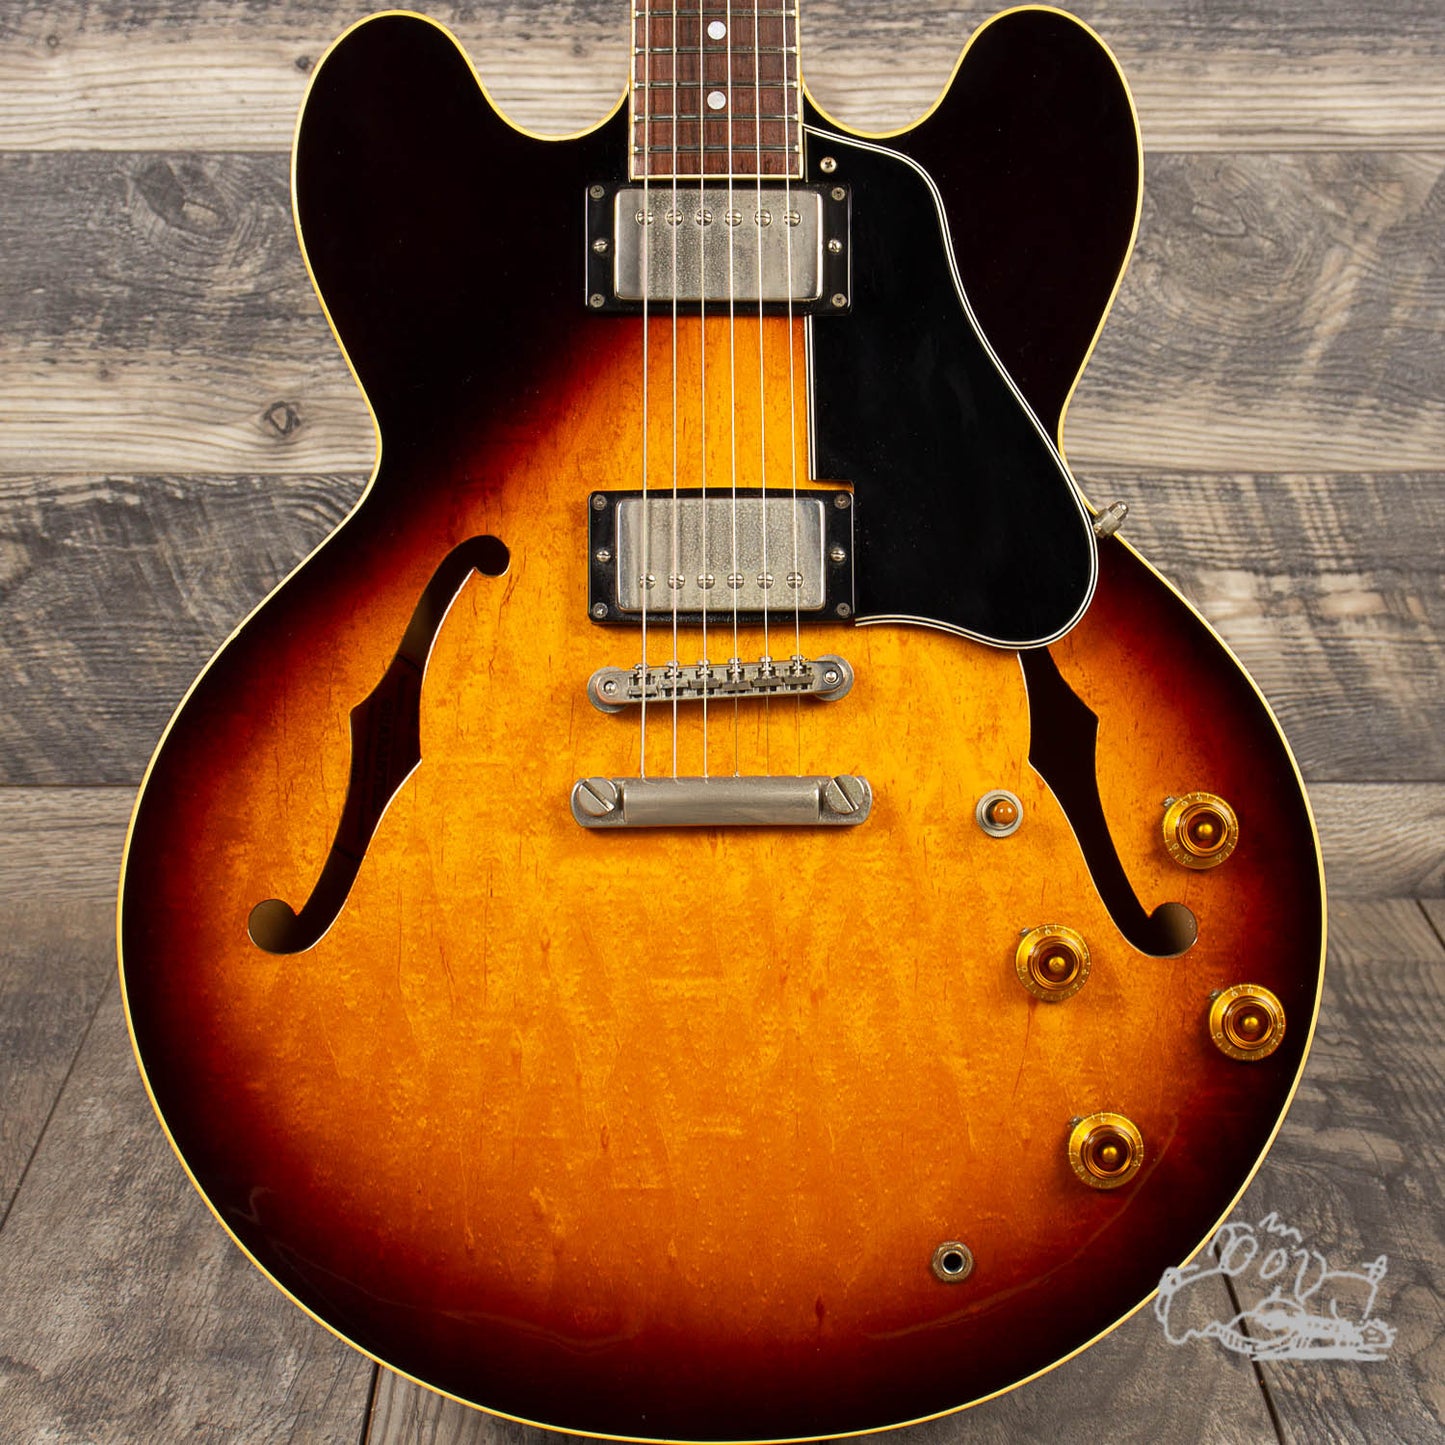 1995 Orville by Gibson ES-335 in Darkburst with Nitrocellulose Lacquer Finish - MIJ